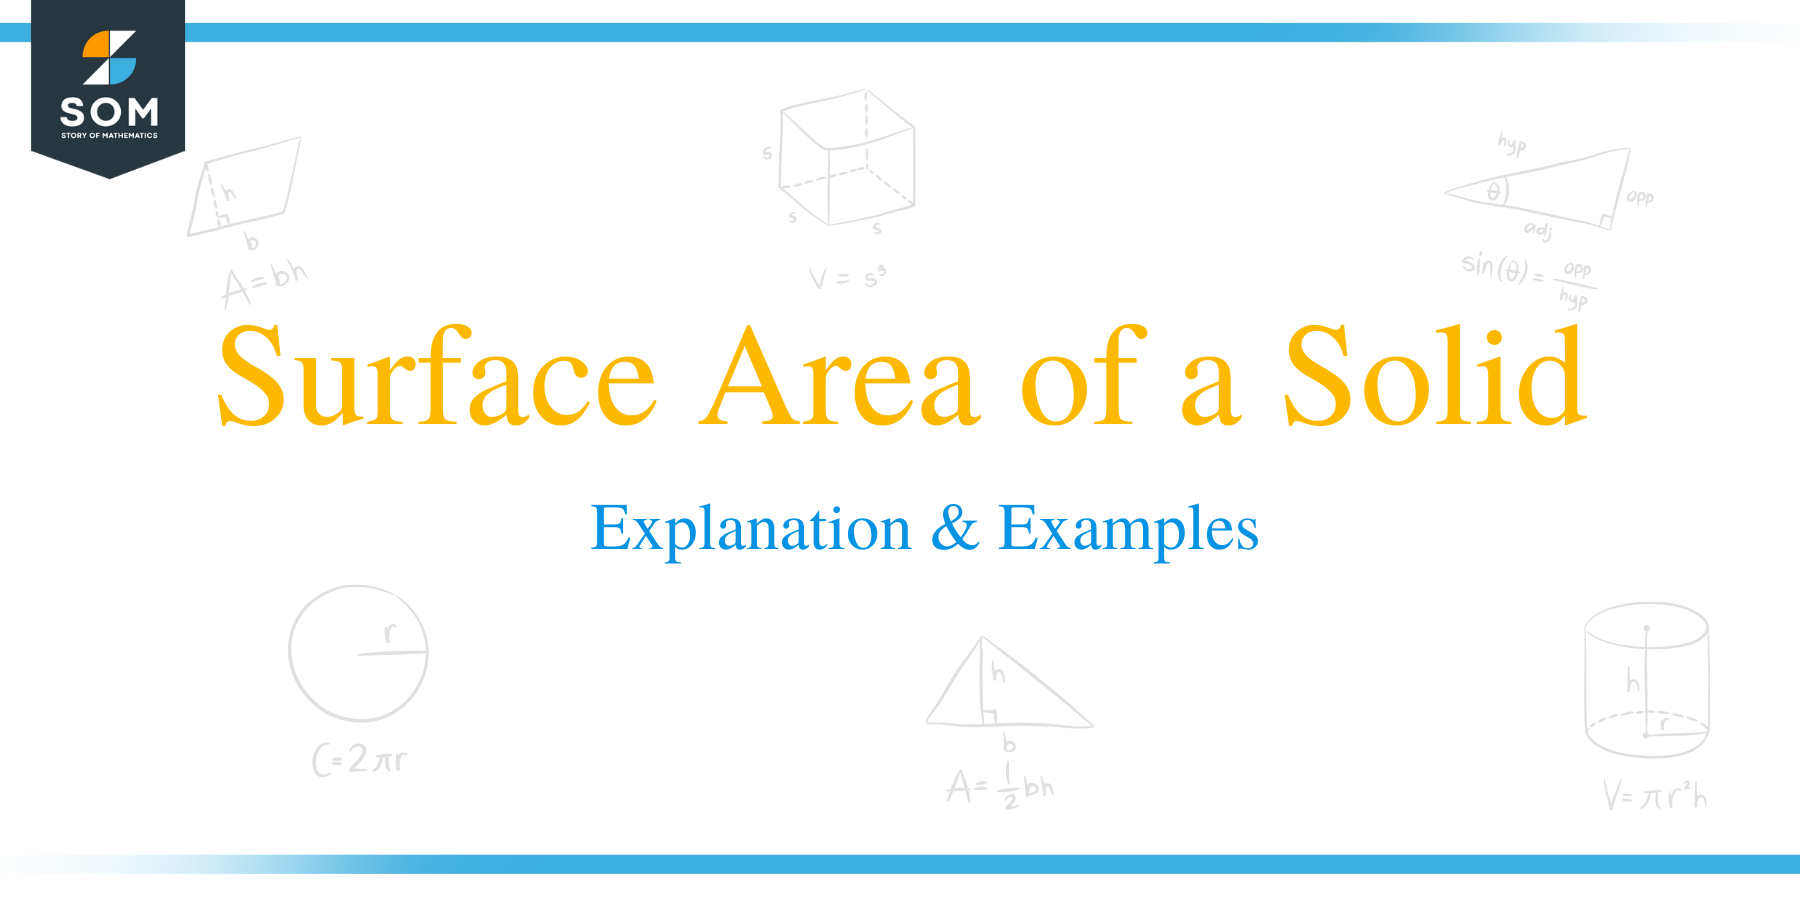 Surface Area of a Solid